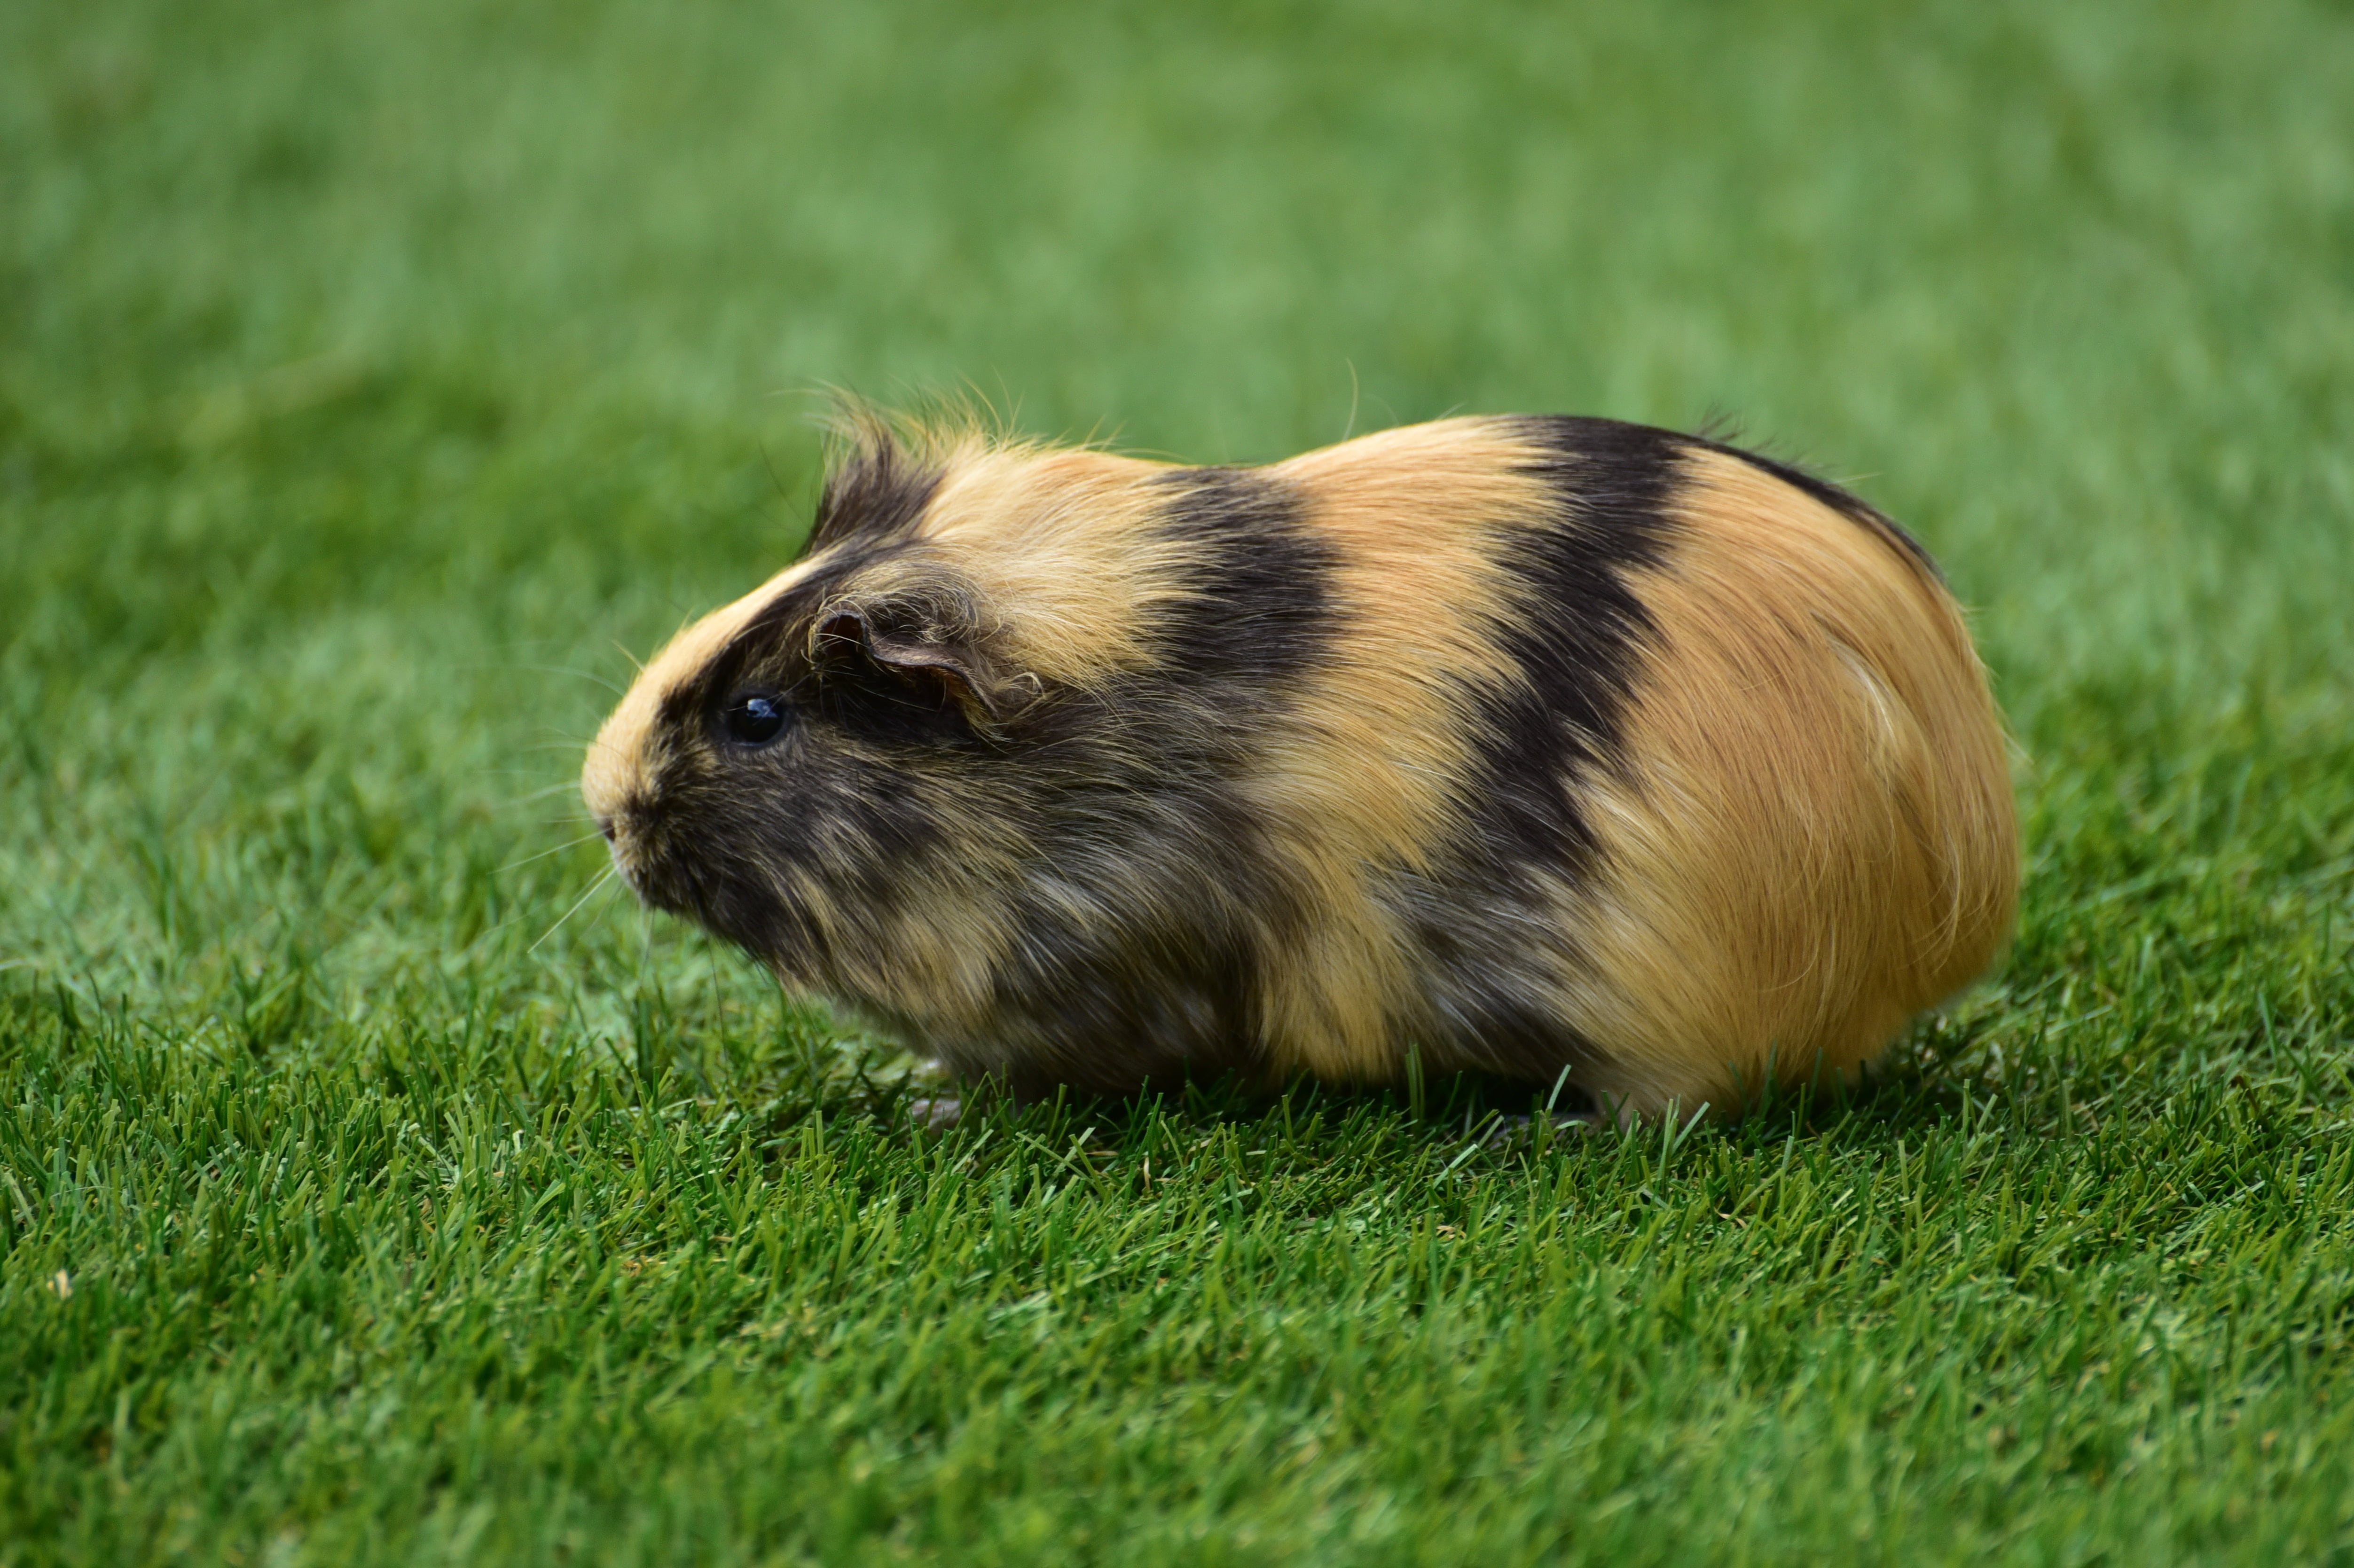 brown and black striped guinea pig